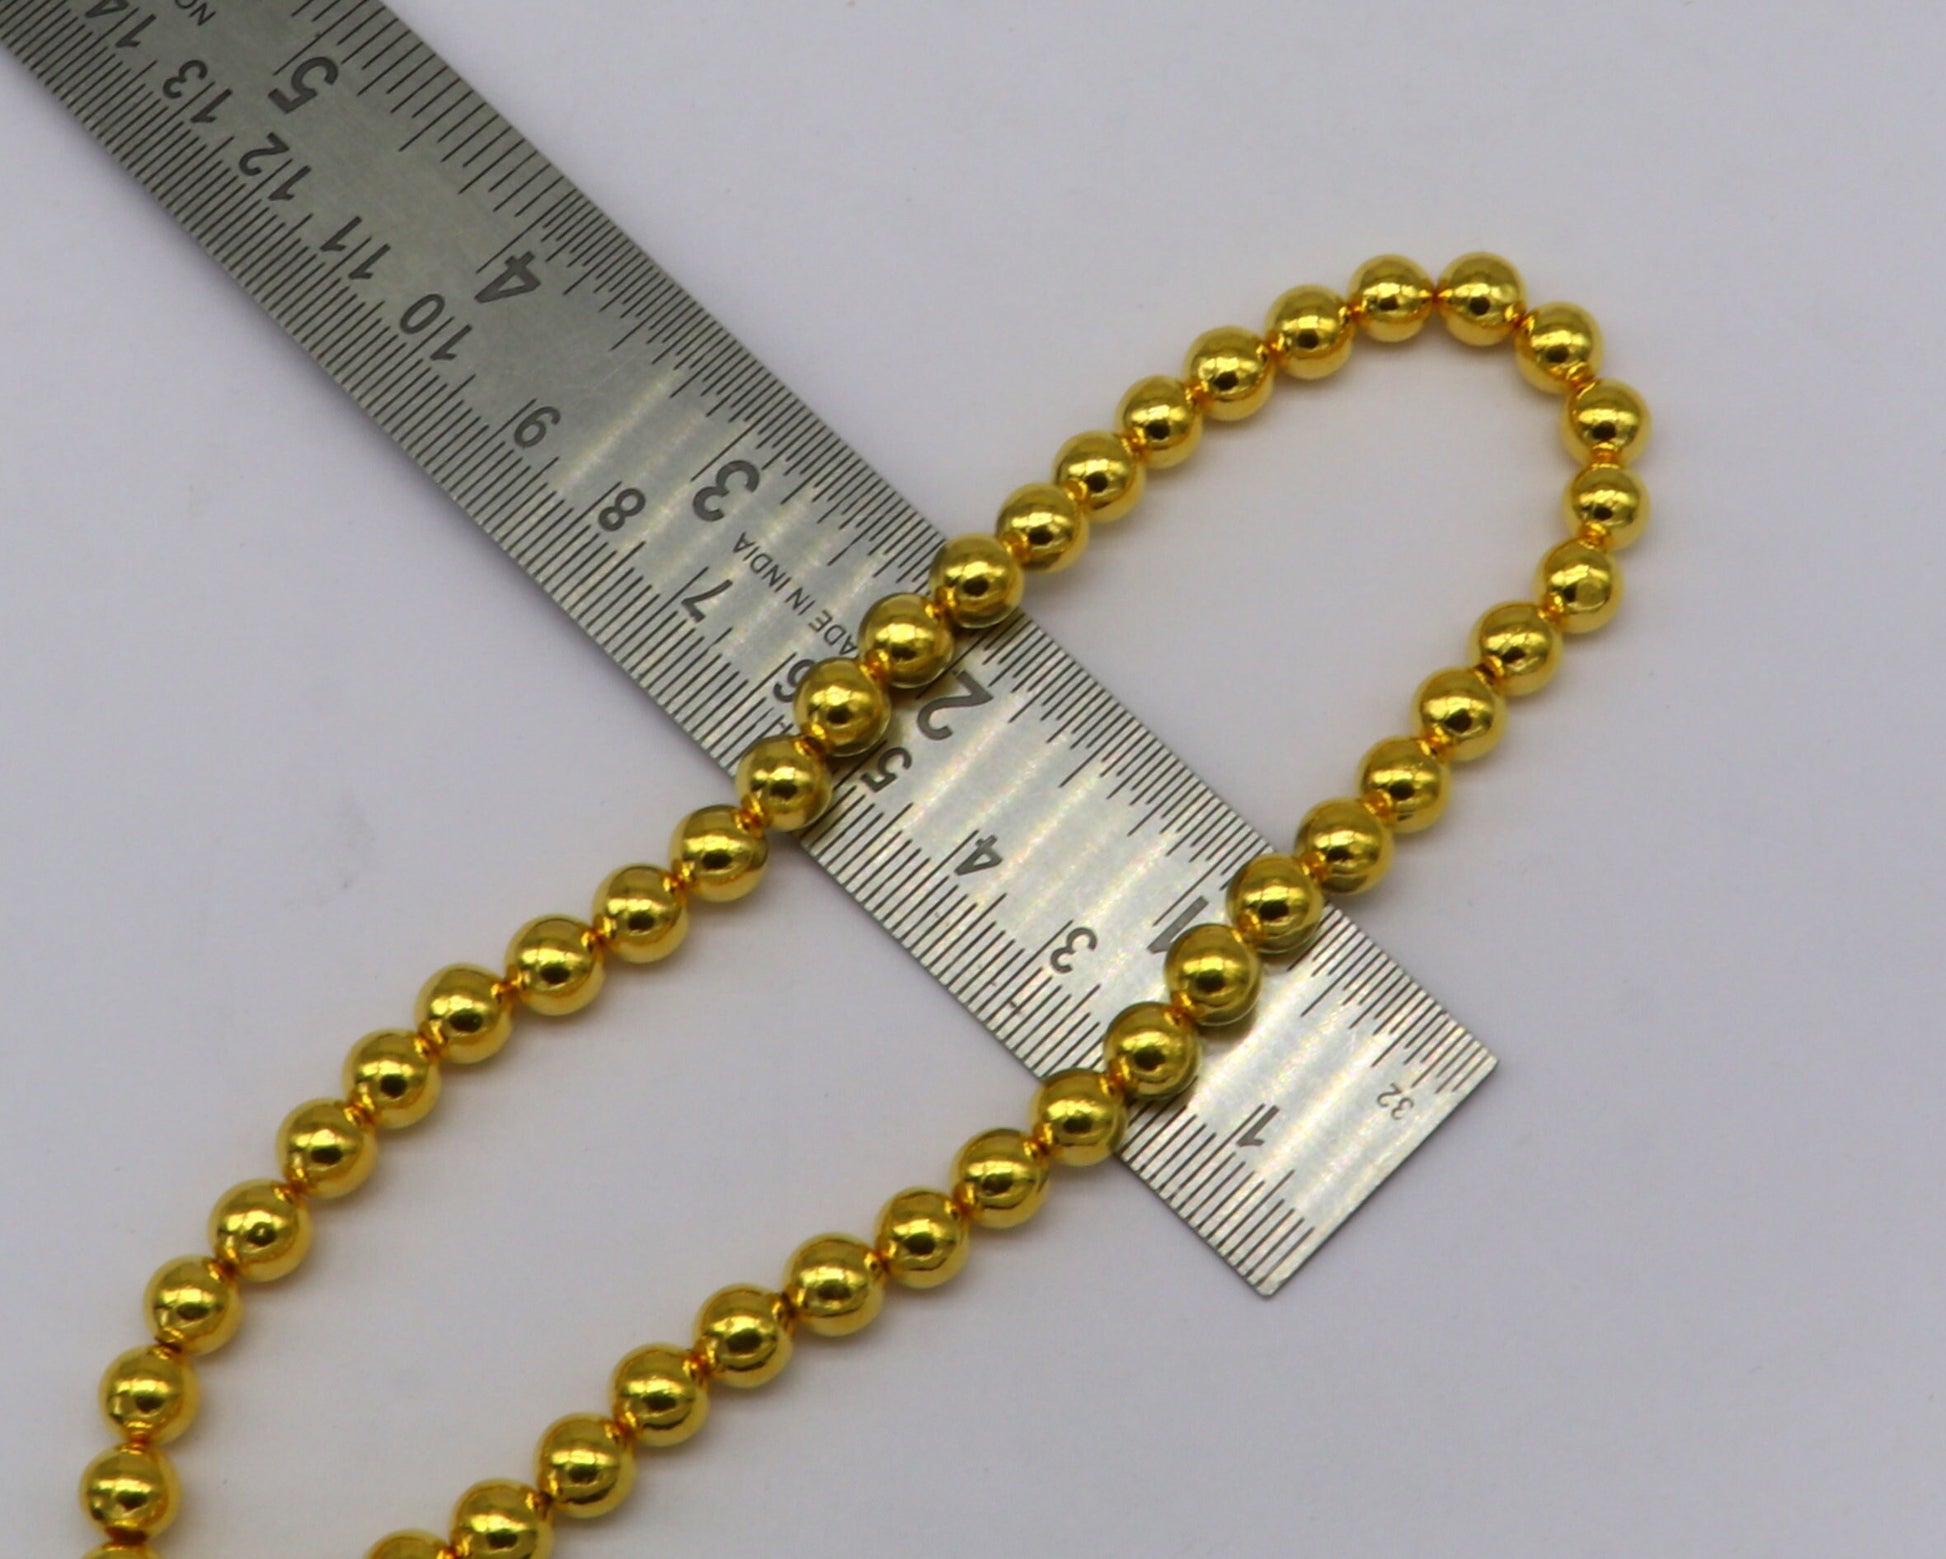 10 pieces 22kt yellow gold handmade 7 mm beads, loose beads, jewelry findings for customize jewelry, excellent wax beads findings BD029 - TRIBAL ORNAMENTS